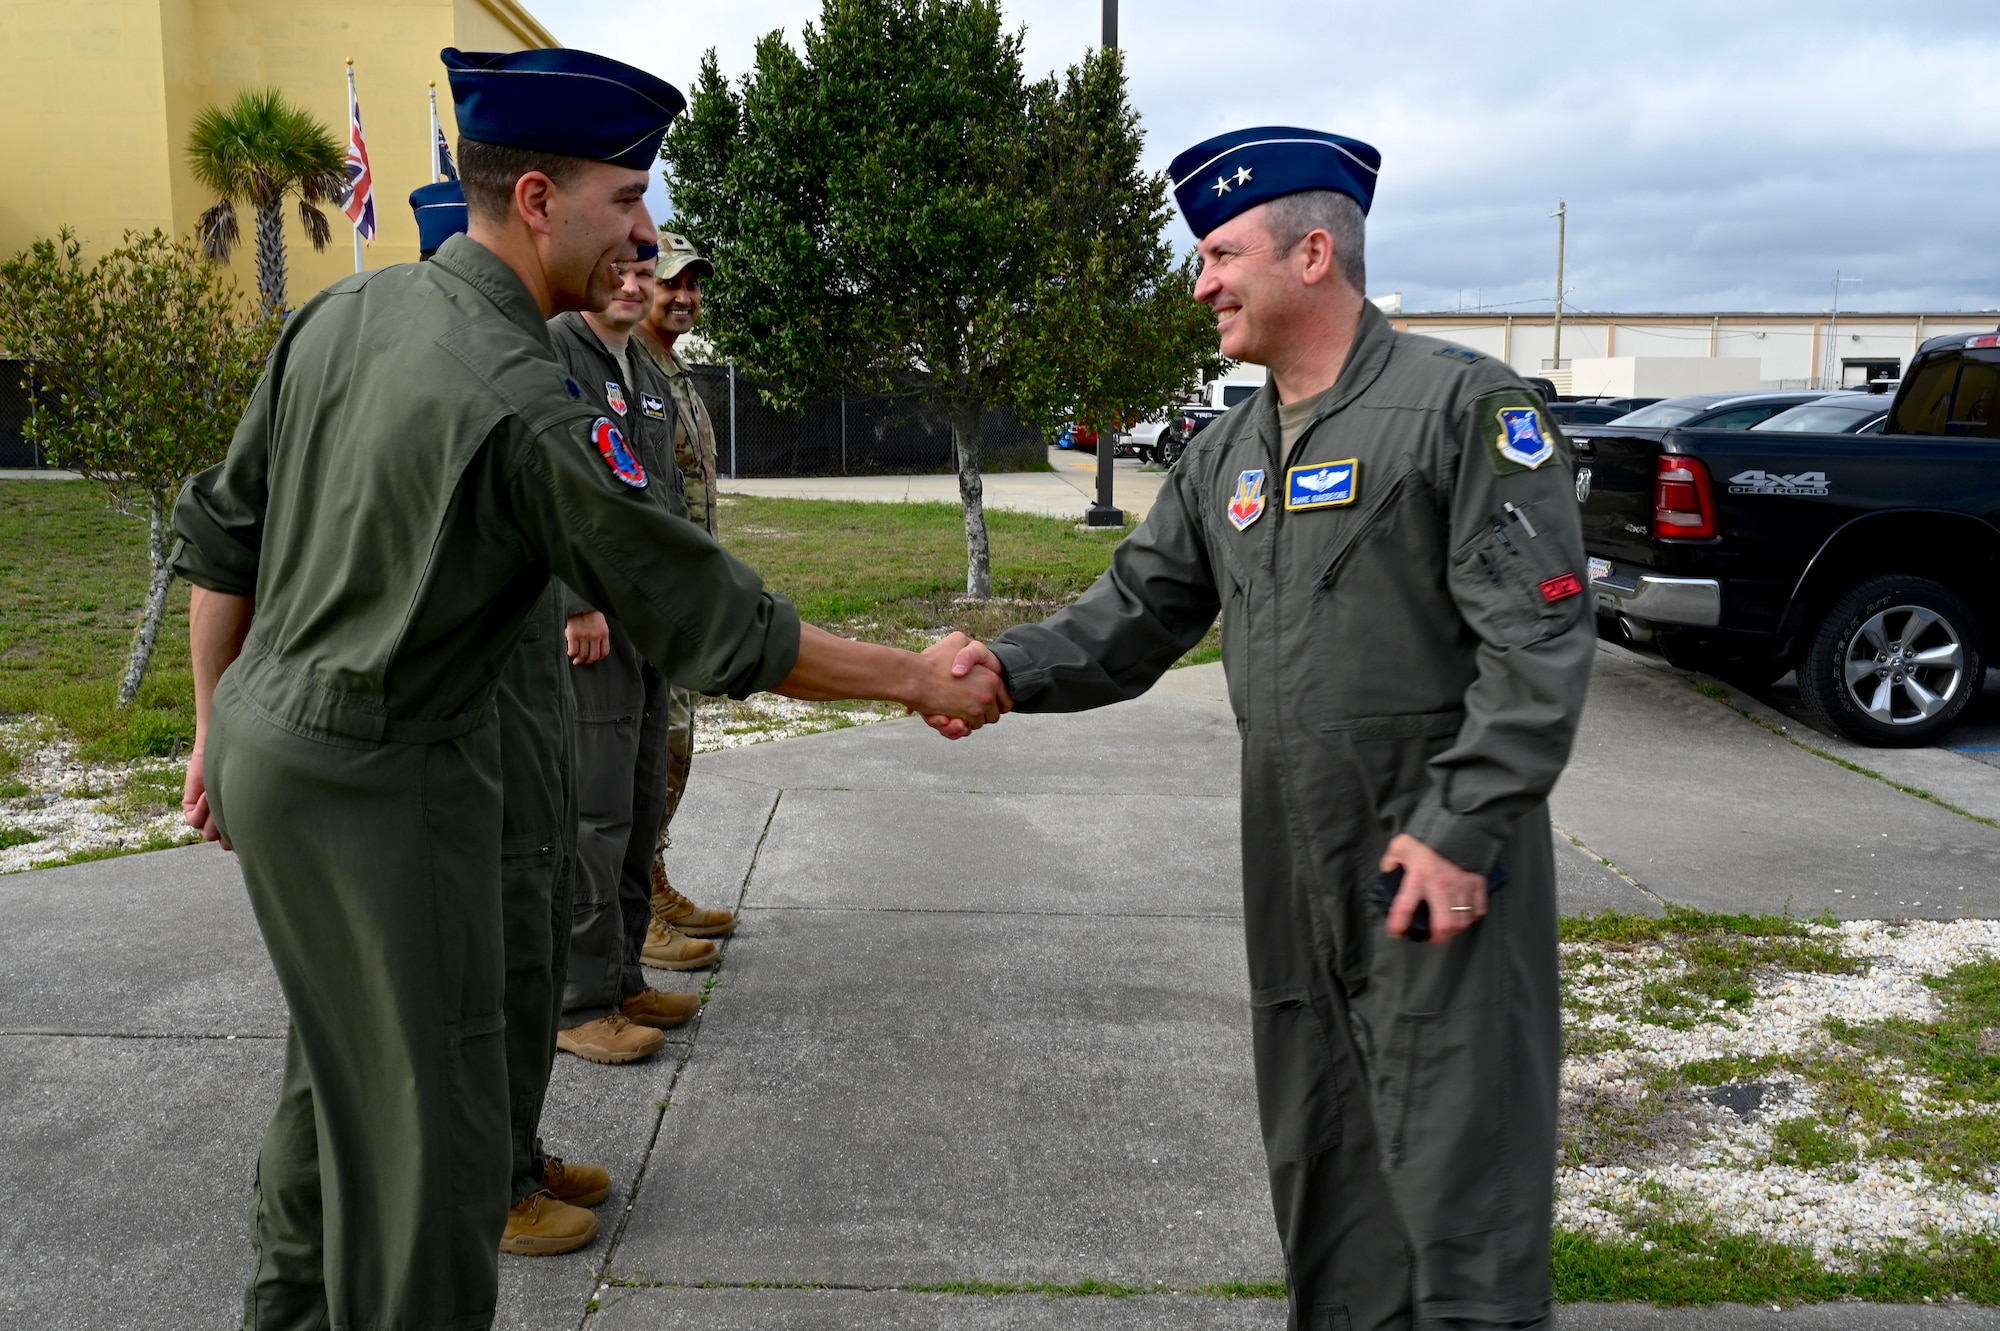 U.S. Air Force Lt. Col. Ronnie Smith, 39th Electronic Warfare Squadron commander, left, greets U.S. Air Force Maj. Gen. David Gaedecke, 16th Air Forces (Air Forces Cyber) vice commander, right, to the 350th Spectrum Warfare Wing at Eglin Air Force Base, Fla., March 1, 2023. During the visit, Crows showcased a variety of missions such as ACEWIRE, the COMBAT SHIELD mission, the F-35 Program and more that are helping to shape the future of warfare. (U.S. Air Force photo by 1st Lt. Benjamin Aronson)